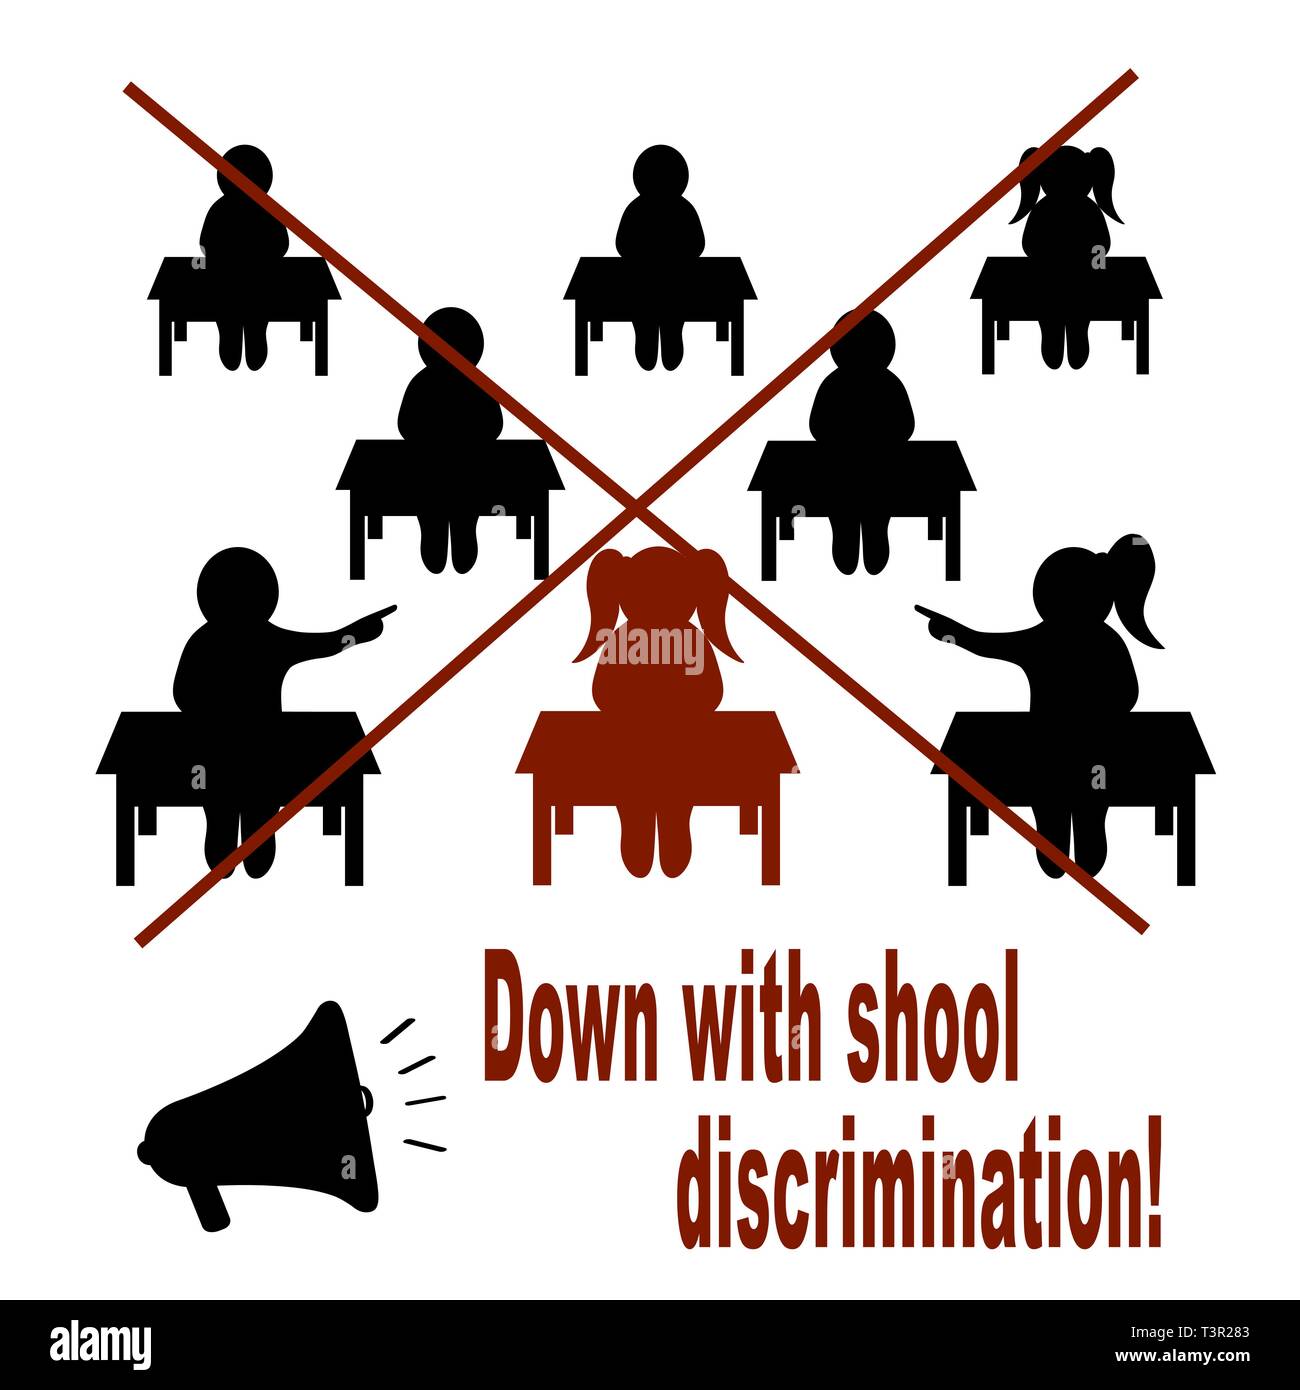 Call against discrimination at school. Poster Stock Vector